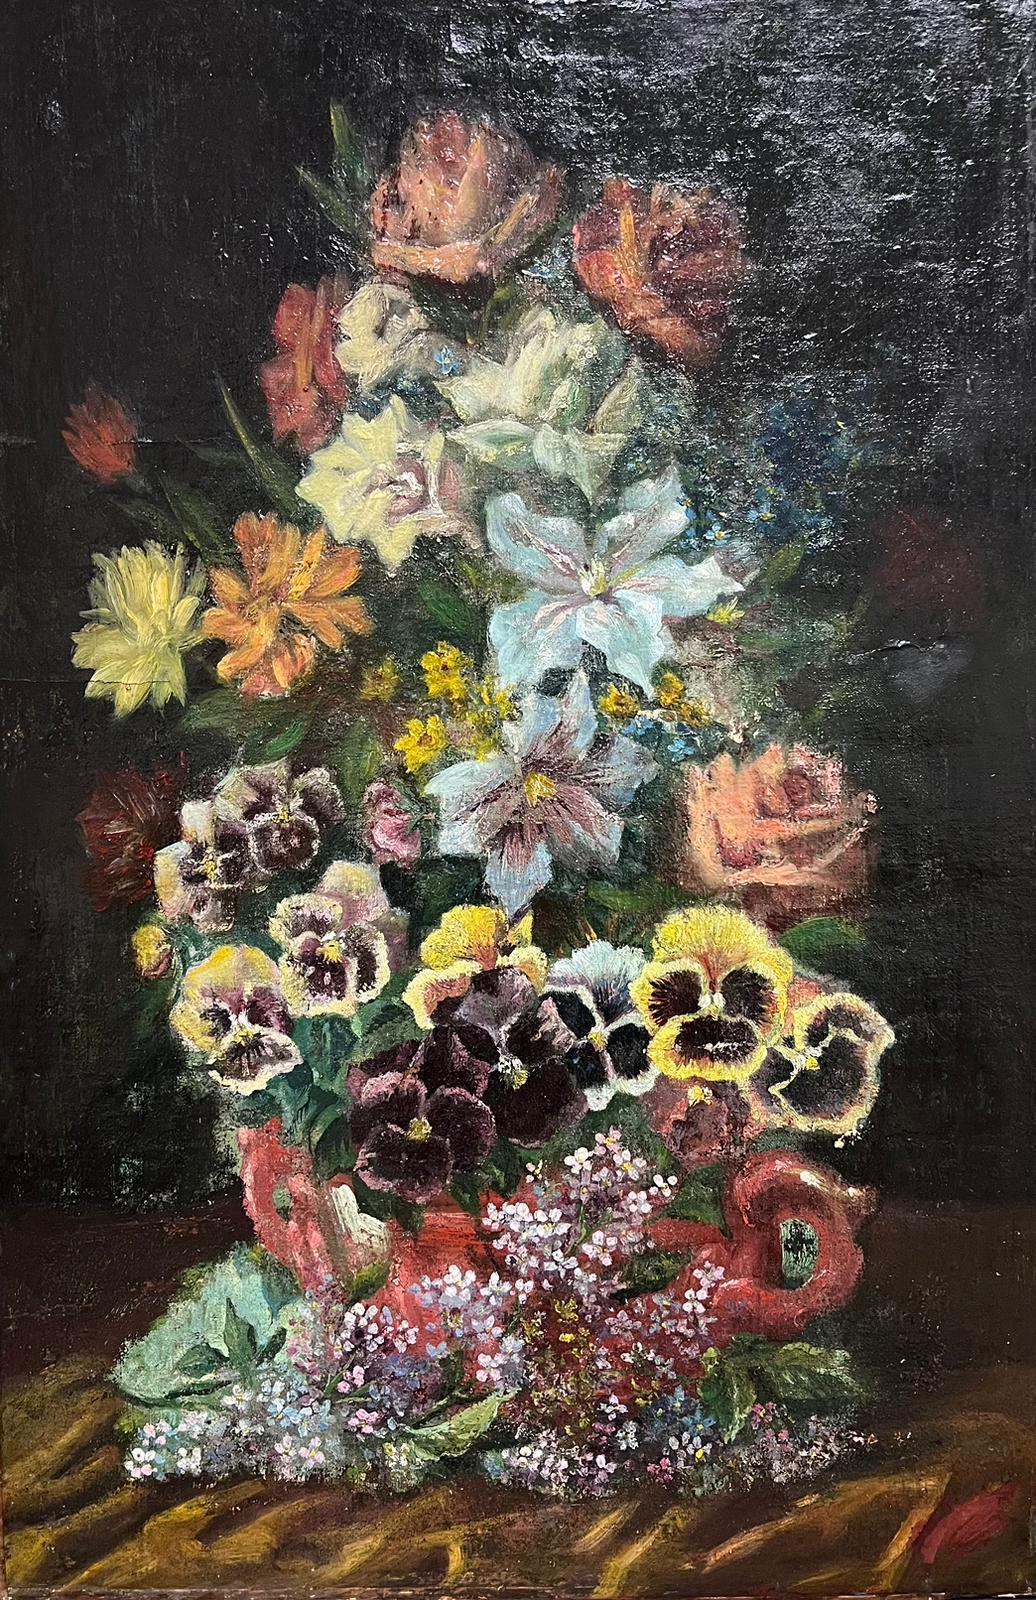 Profusion of Flowers
Classical Still Life
Dutch School, 19th century
oil on canvas, unframed
canvas : 32 x 21 inches
provenance: private collection
condition: very good and sound condition